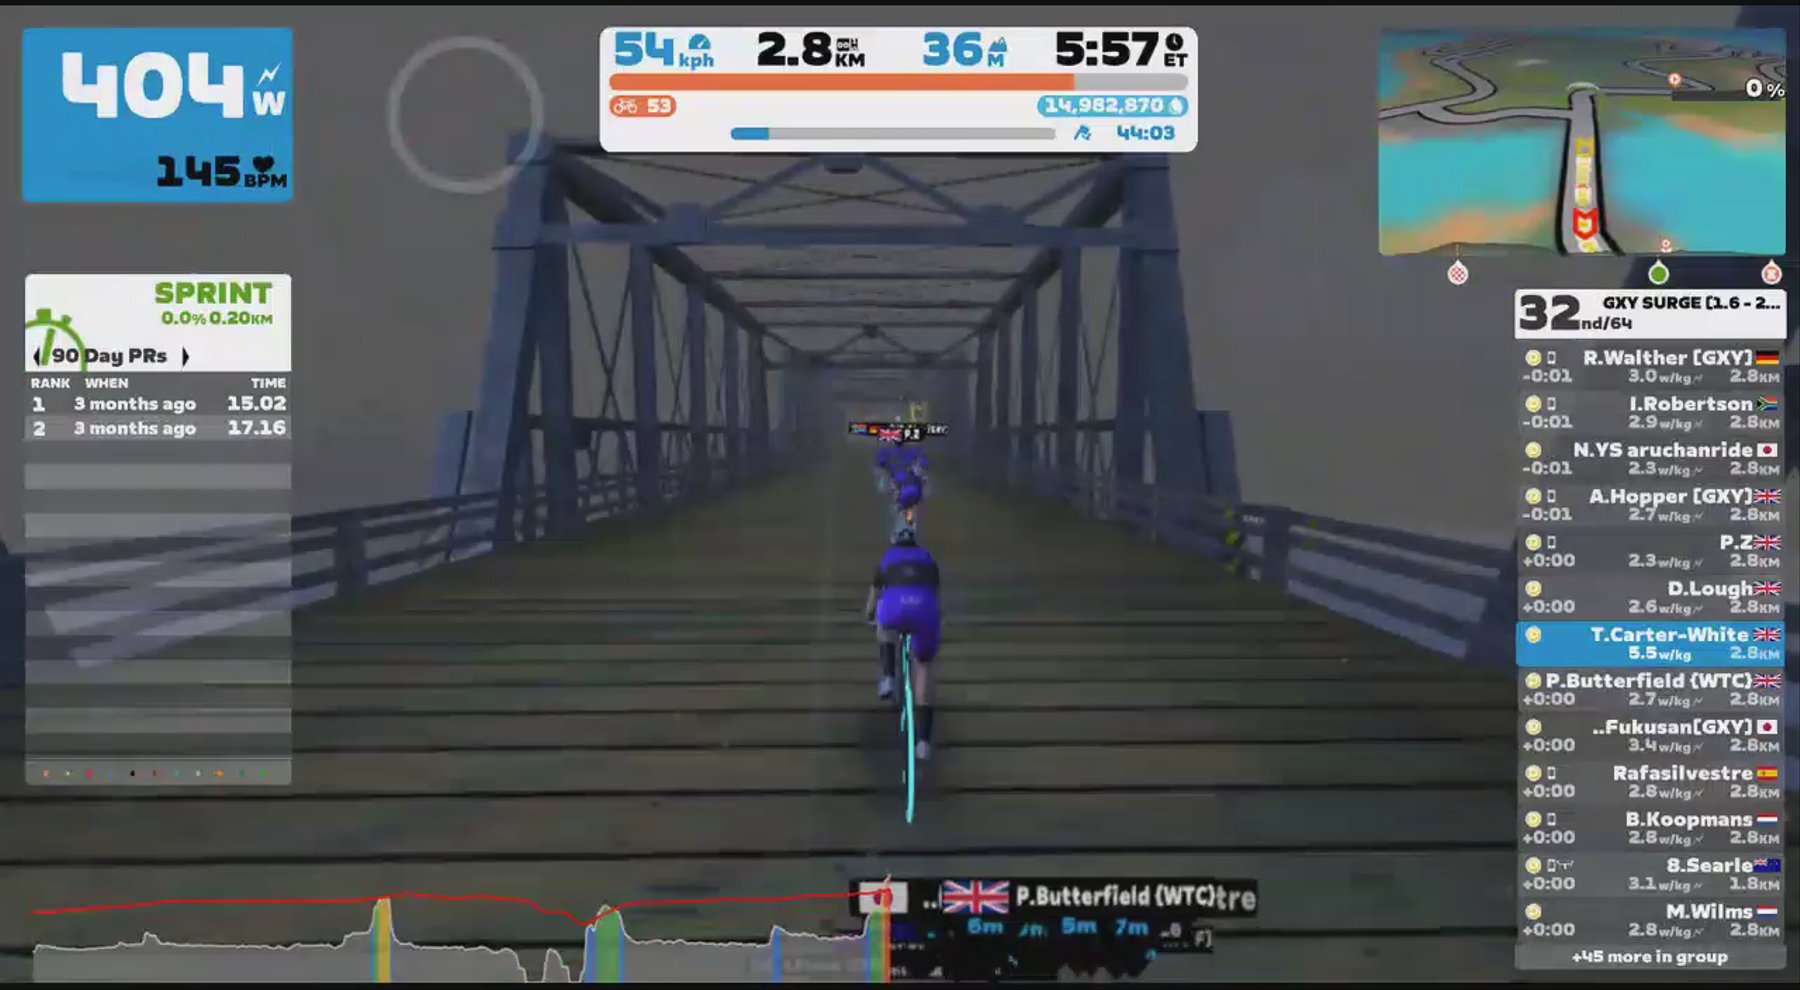 Zwift - Group Ride: GXY SURGE [1.6 - 2.5wkg] (D) on Seaside Sprint in Watopia